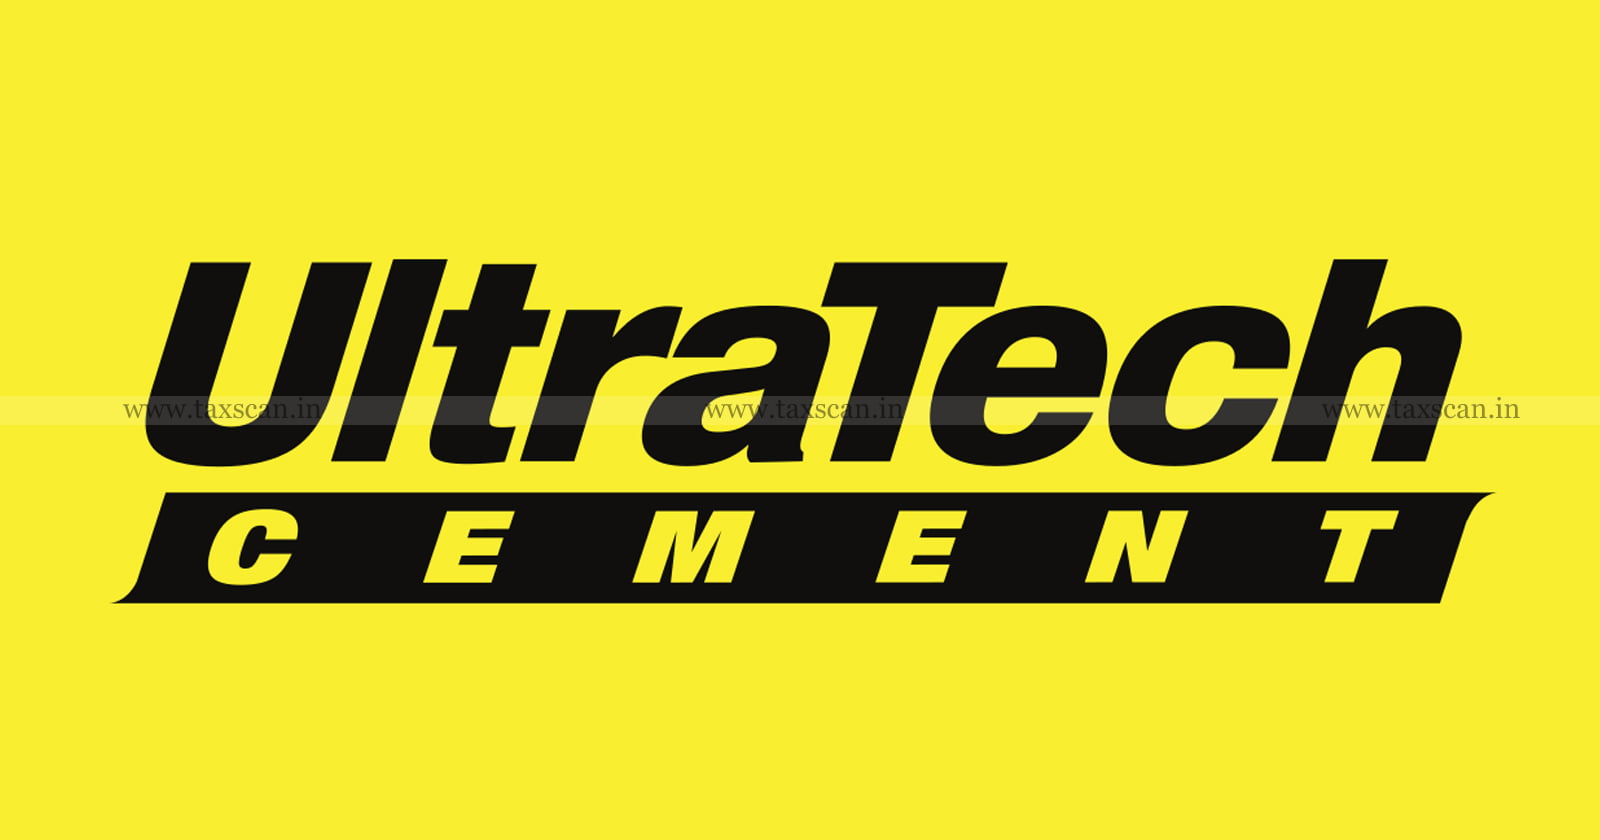 Lease - Charges - Paid - by - Railway - to - Ultratech - Cement - Not - subject - to - VAT - Chhattisgarh - HC - TAXSCAN